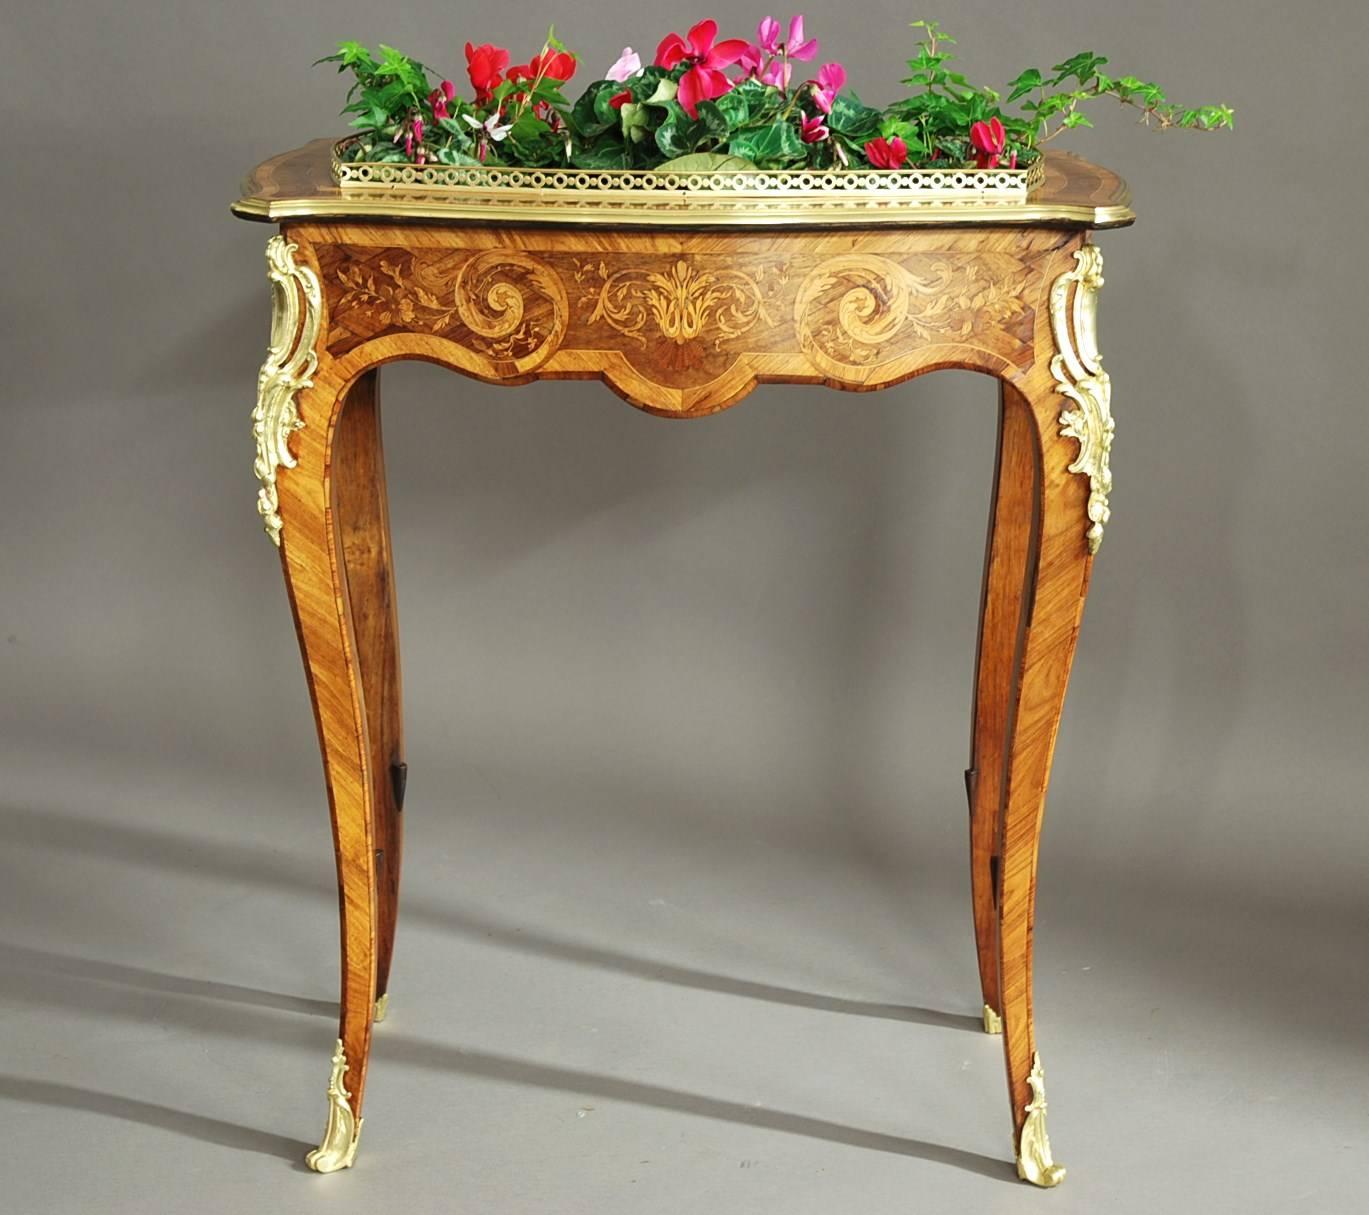 A fine quality late 19th century Edwards & Roberts highly decorative ormolu mounted inlaid plant stand or jardiniere of serpentine form in the French style.

This piece consists of a serpentine shaped top being crossbanded in Kingwood with boxwood